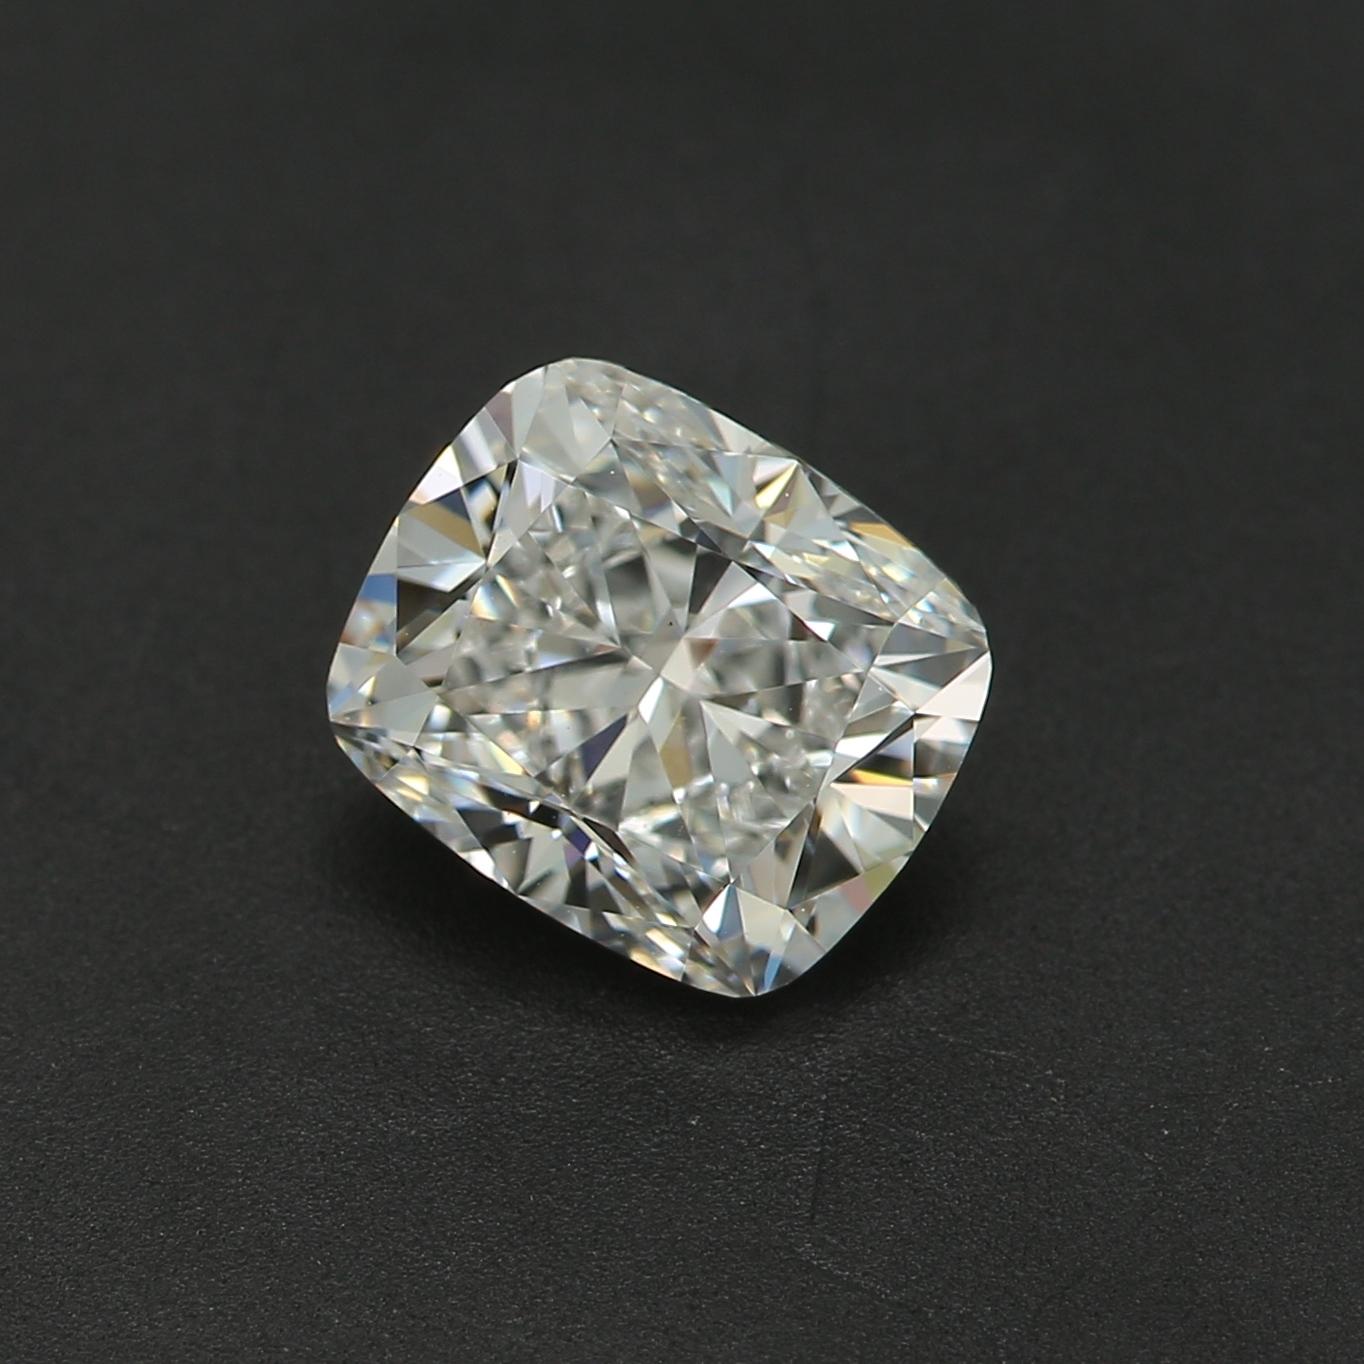 *100% NATURAL FANCY COLOUR DIAMOND*

✪ Diamond Details ✪

➛ Shape: Cushion
➛ Colour Grade: D
➛ Carat: 1.01
➛ Clarity: VS1
➛ GIA Certified 

^FEATURES OF THE DIAMOND^

Our 1.01 carat diamond refers to the diamond's weight, not its physical